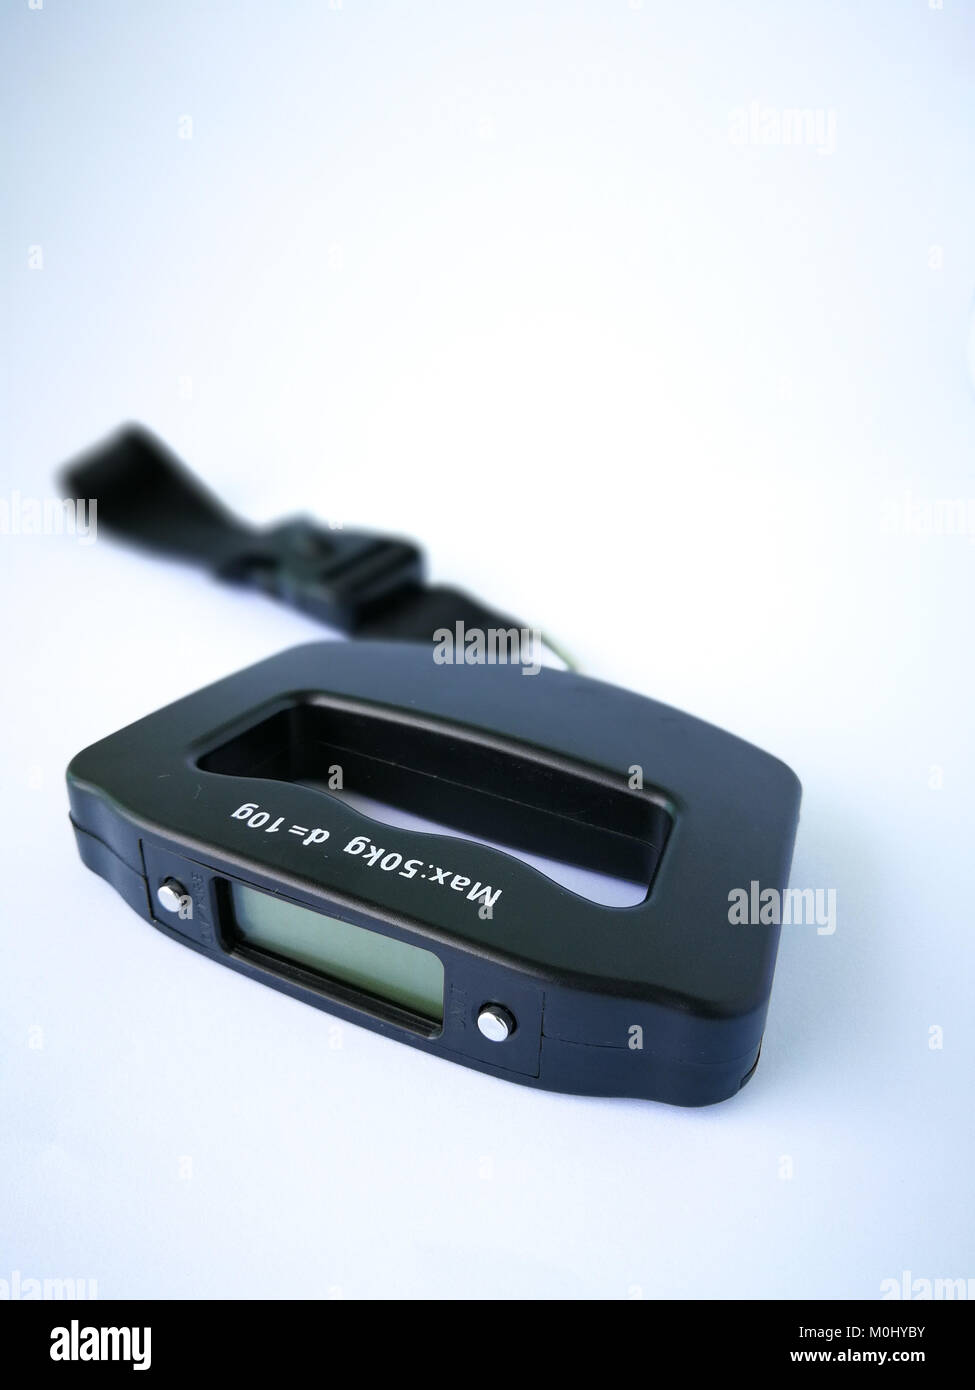 https://c8.alamy.com/comp/M0HYBY/digital-luggage-weighing-scales-isolated-on-white-M0HYBY.jpg